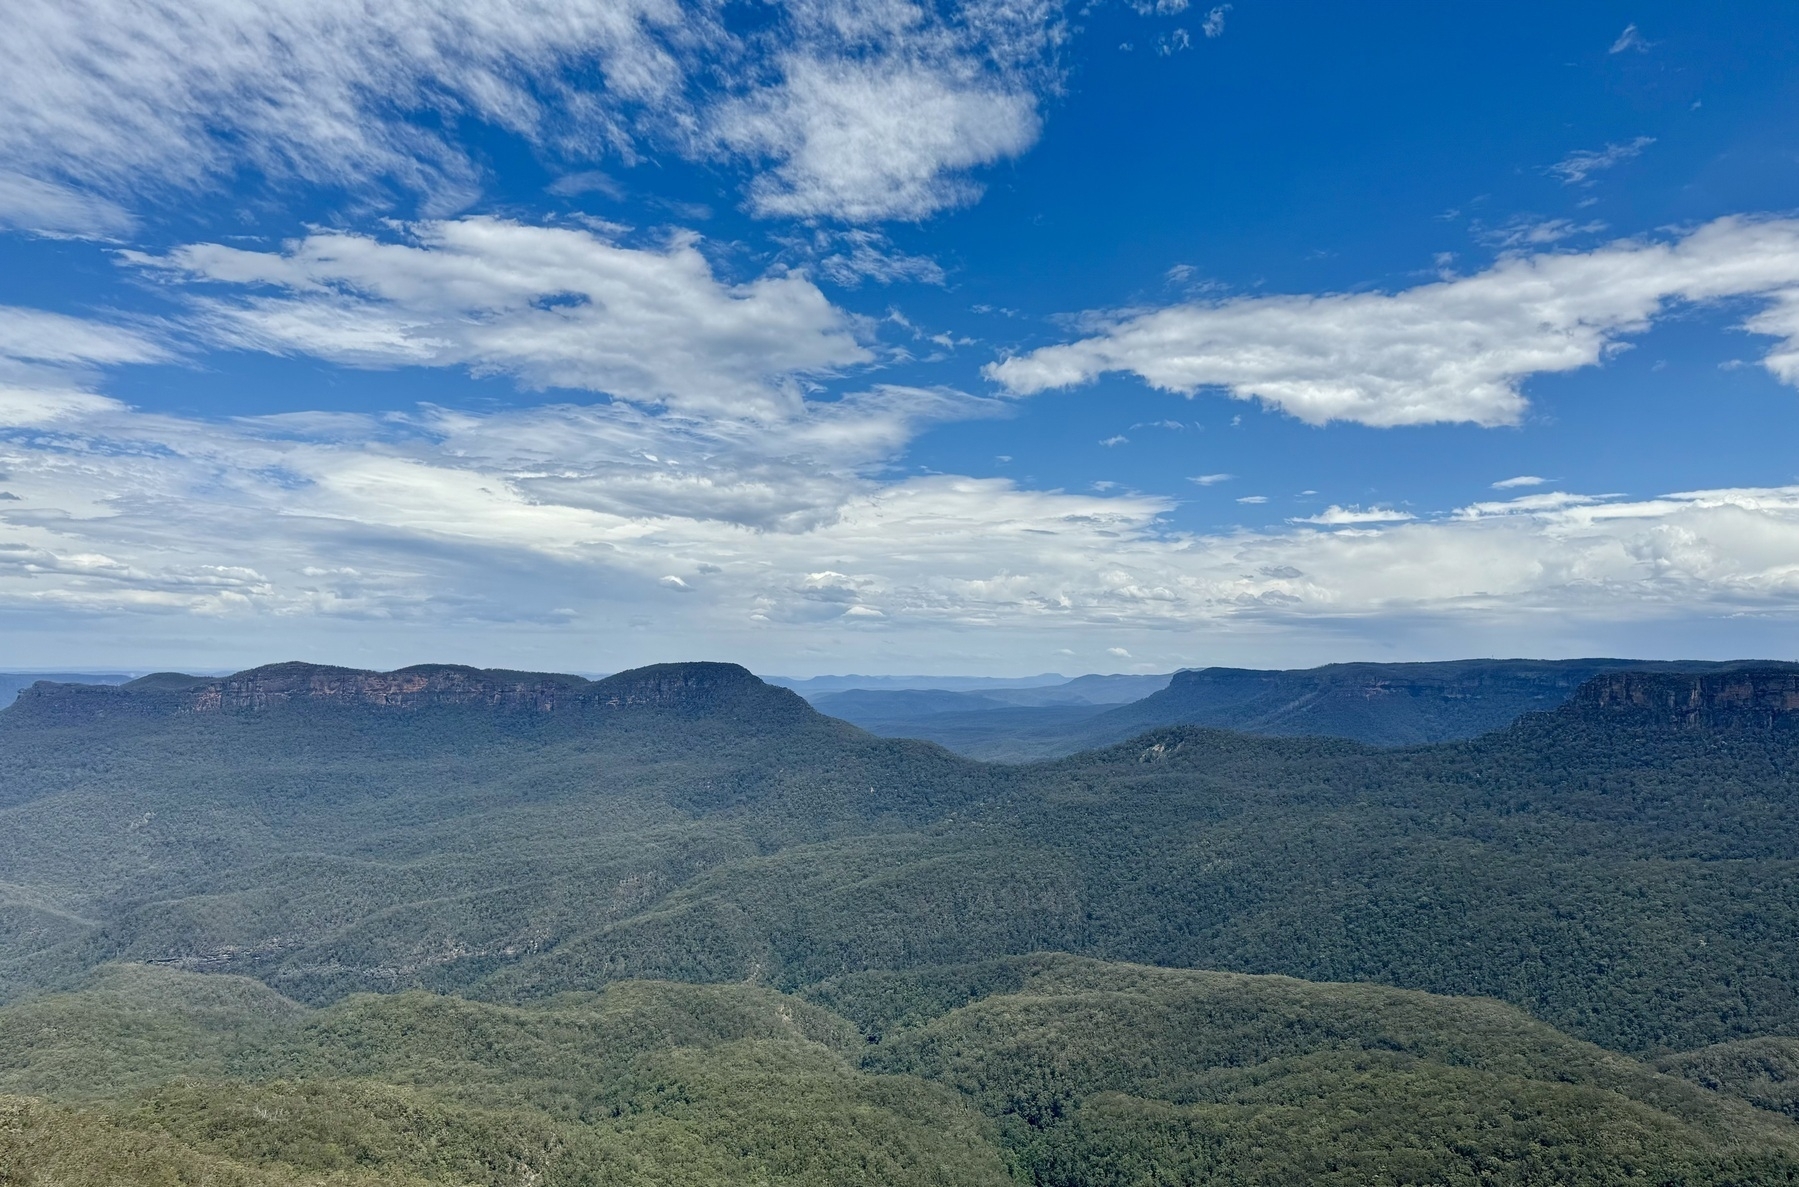 Looking down at eucalyptus forests from Echo Point in the Blue Mountains. The forests stretch to the horizon, under a blue sky with white clouds.